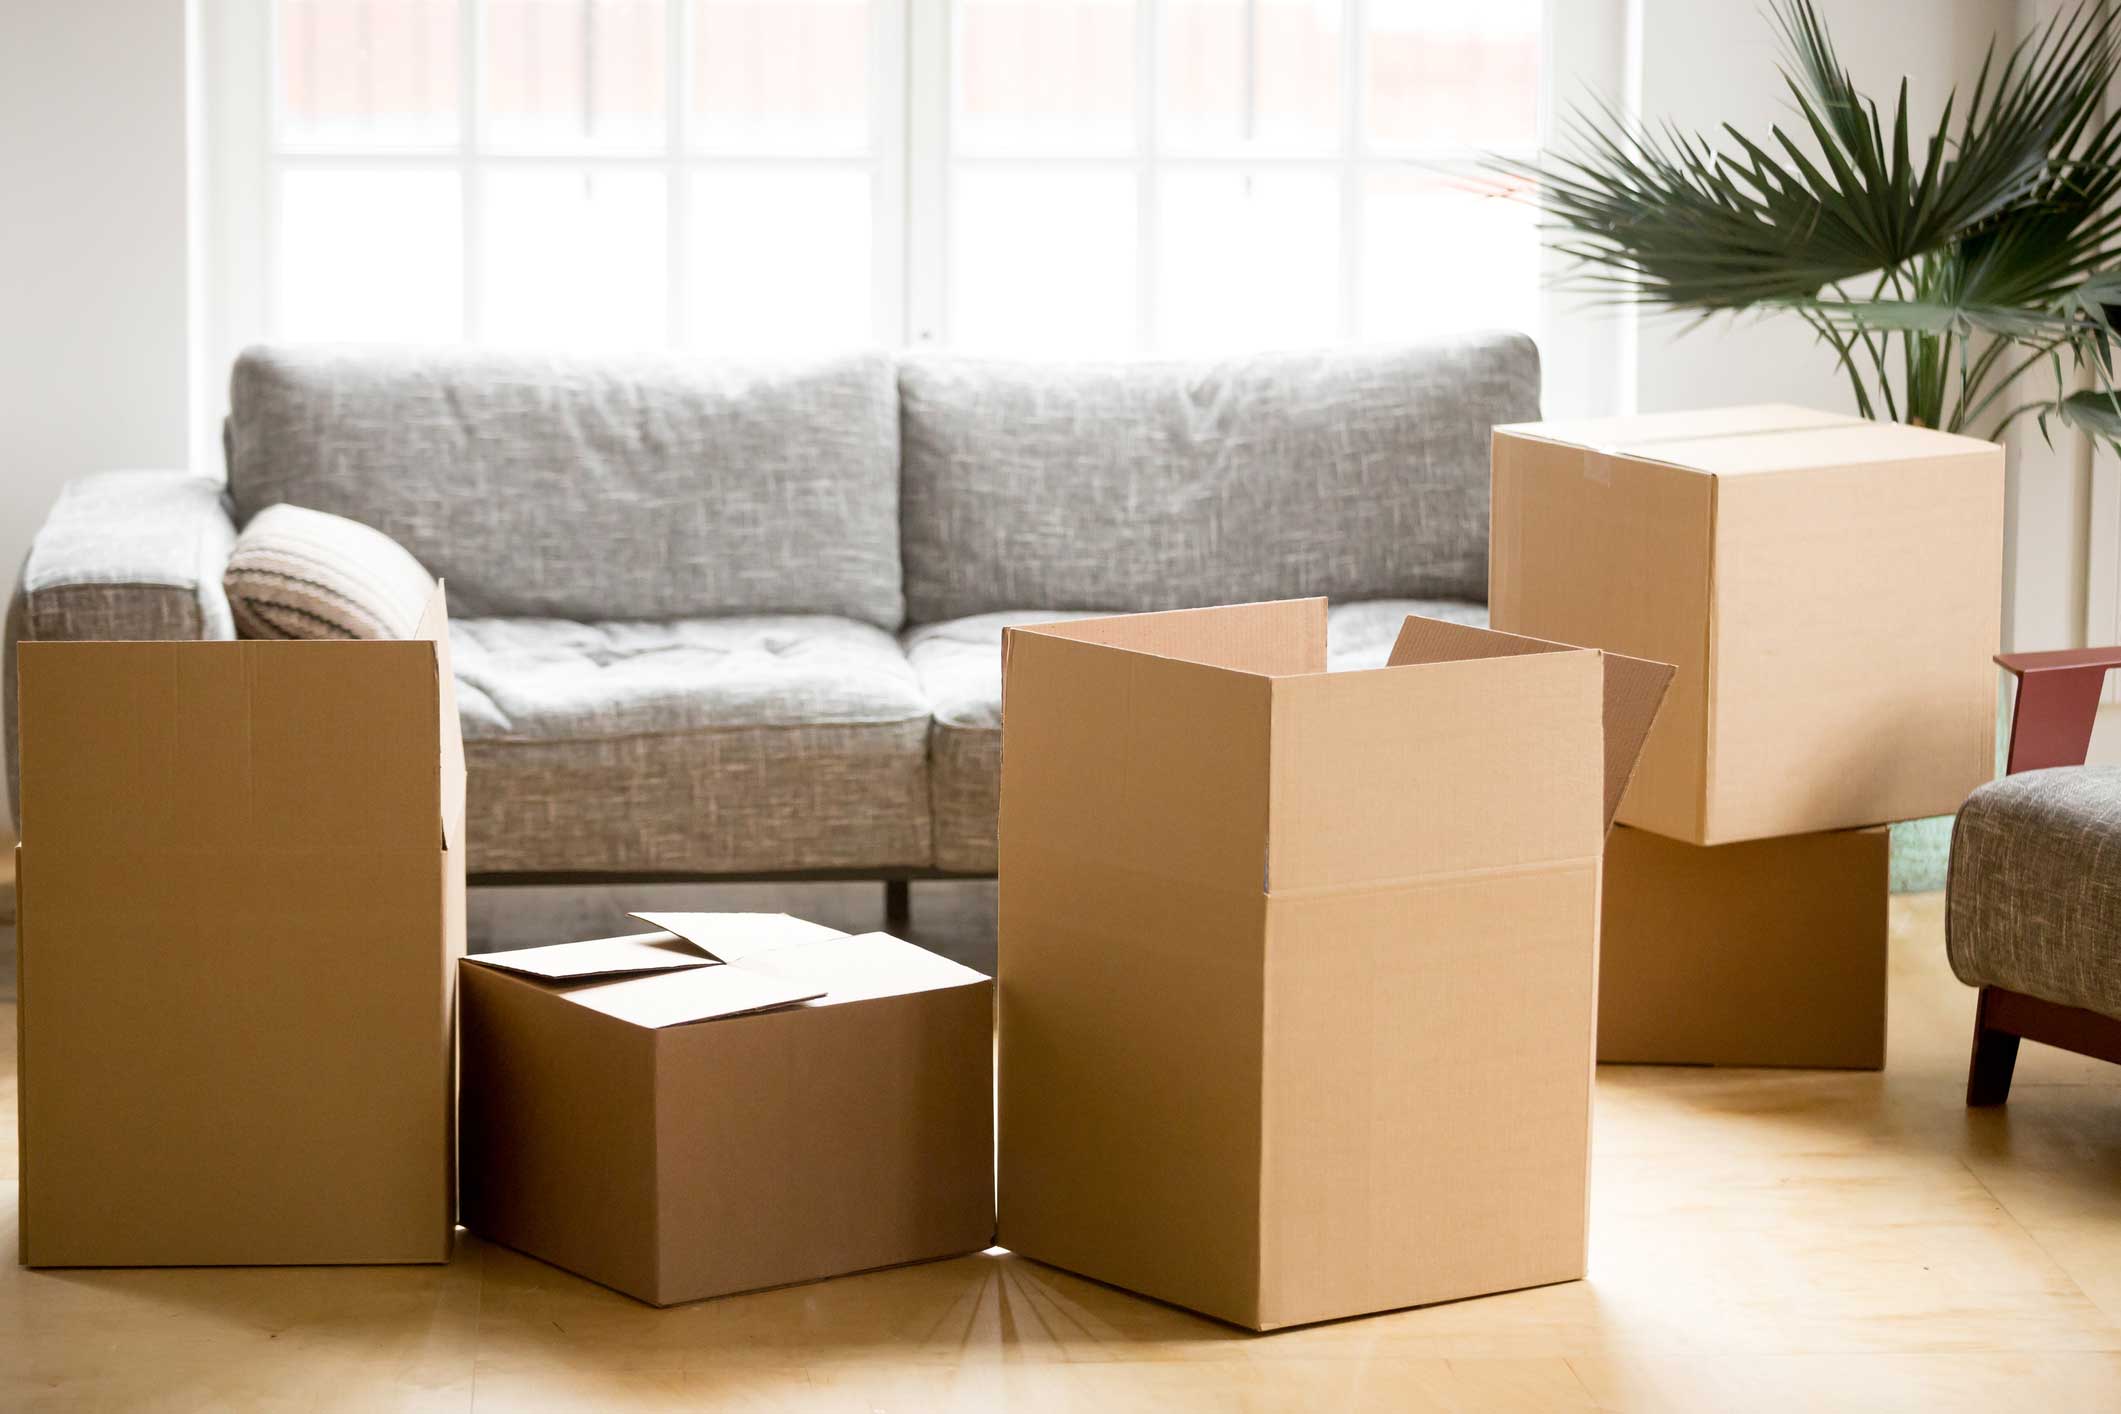 House Movers Melbourne – Professional Removal service